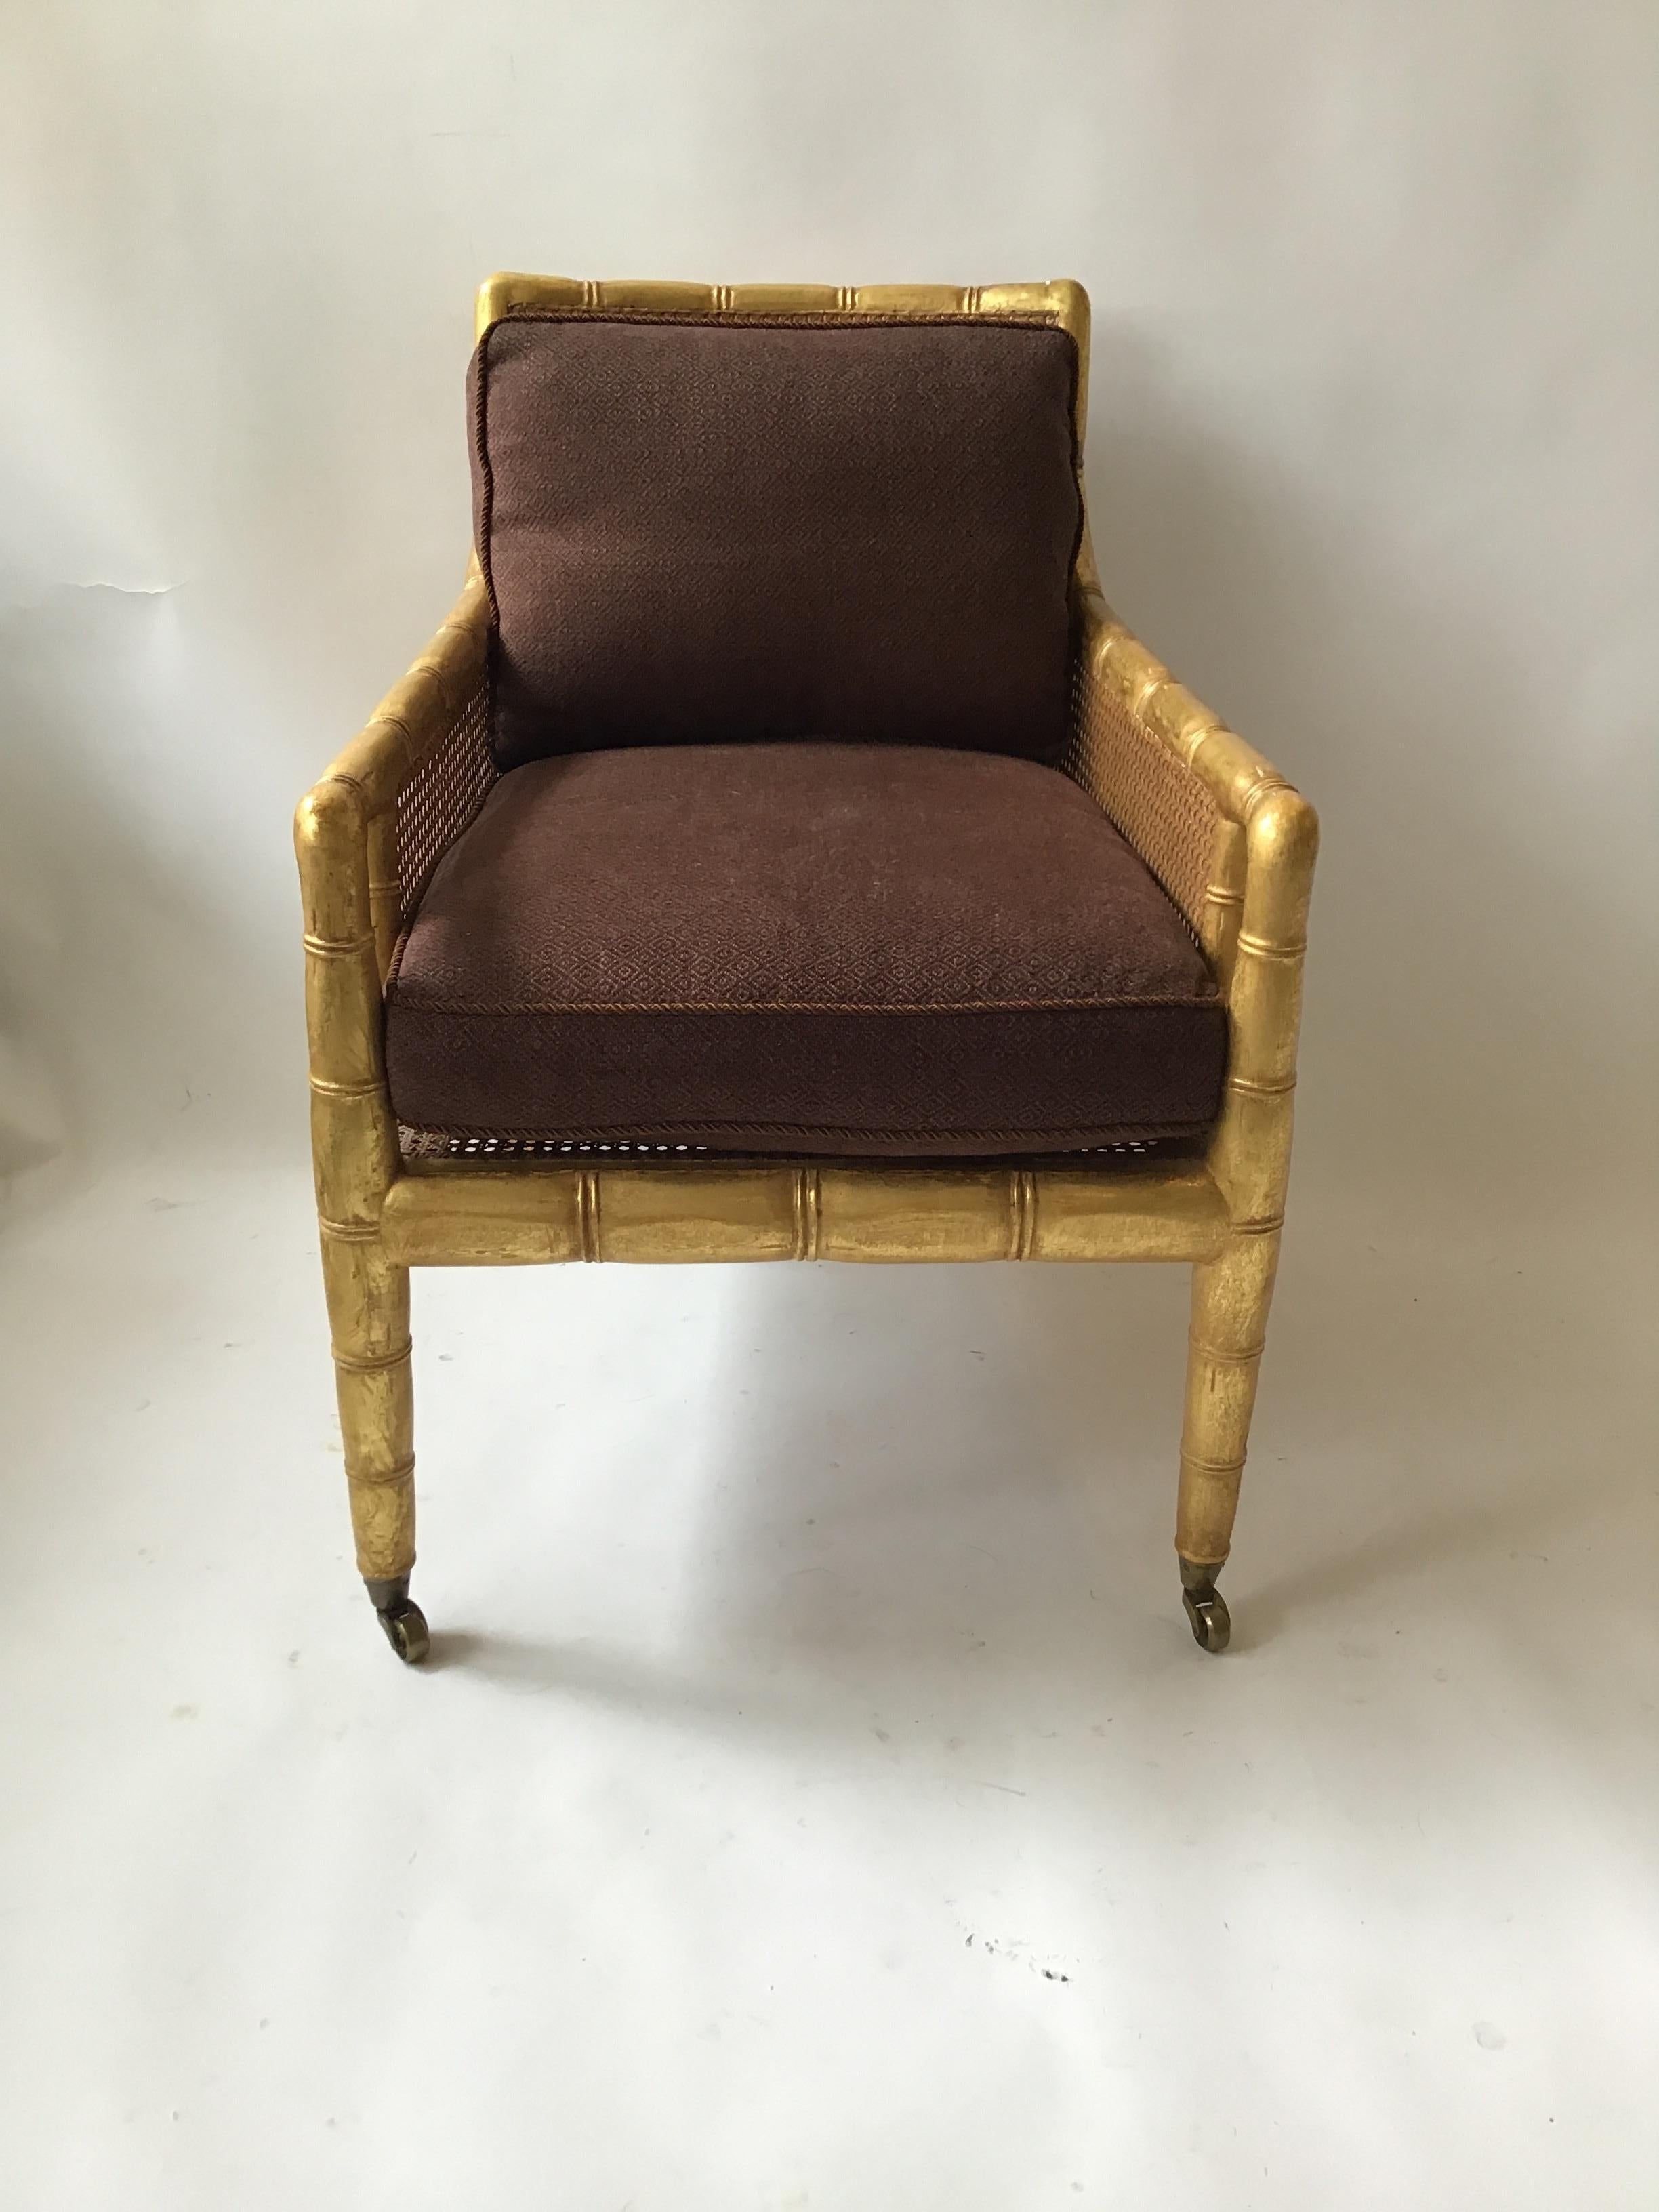 Gilt faux bamboo caned lounge chair. From a Southampton, NY celebrities oceanfront estate.